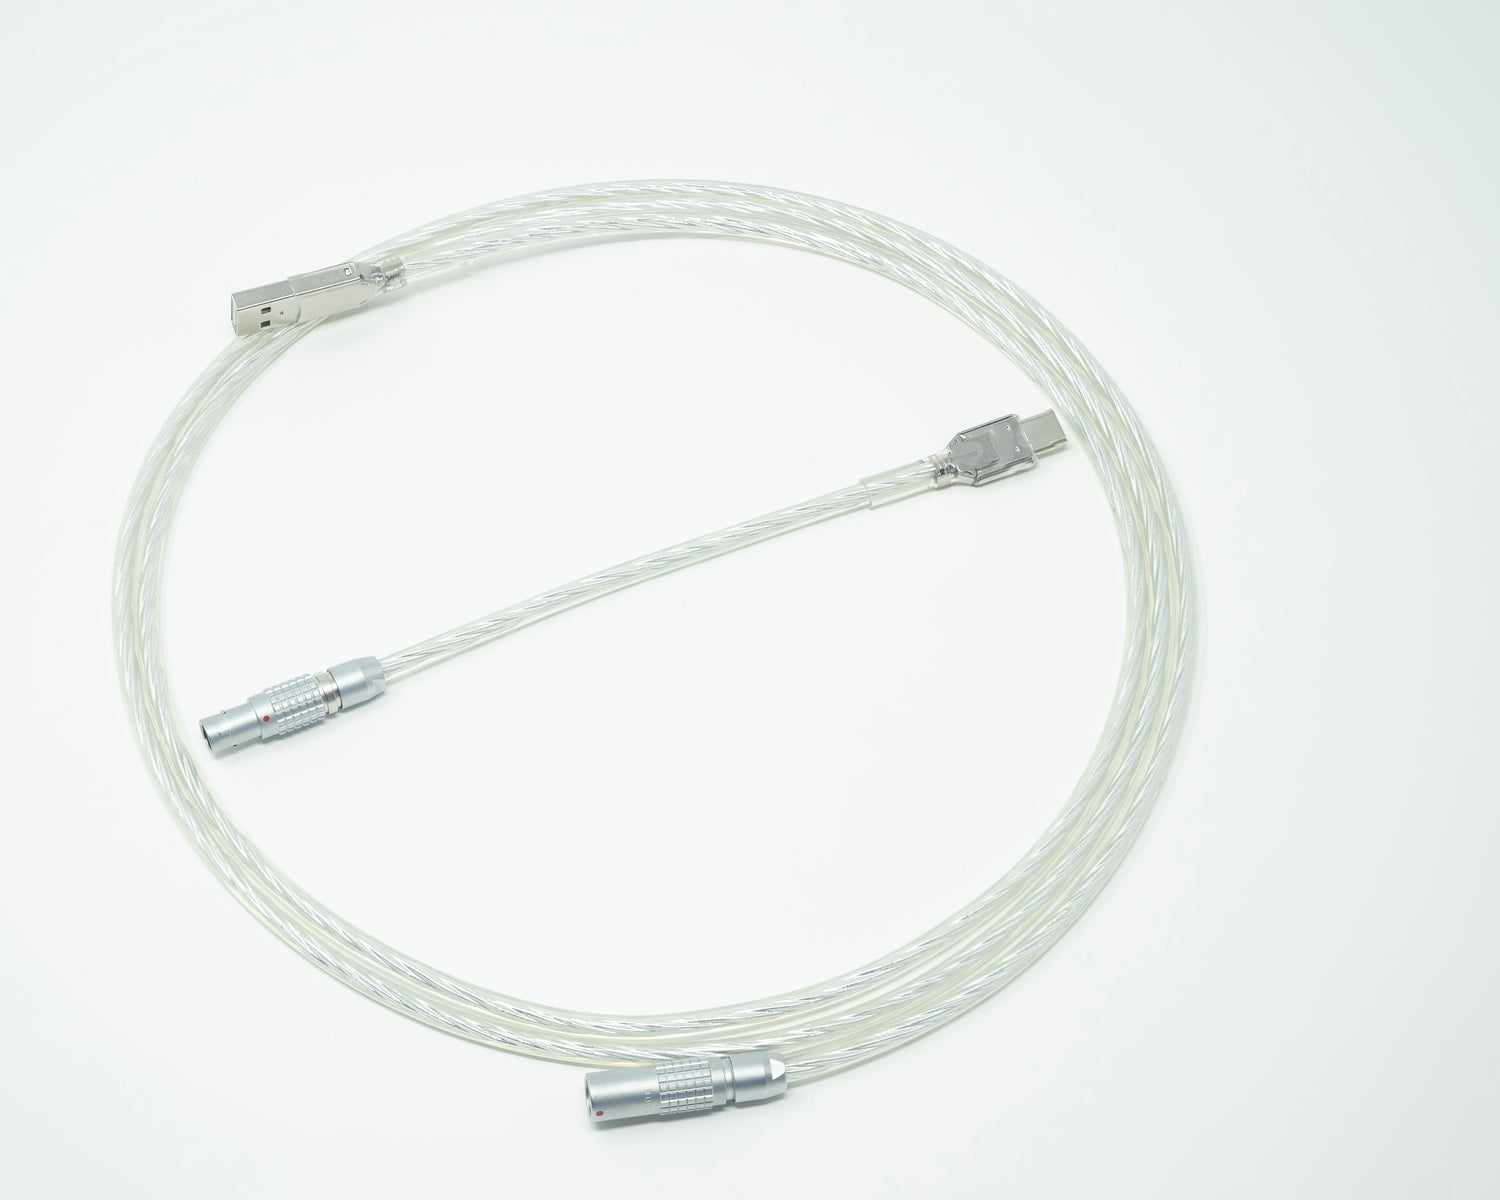 [Closed] Helheim Designs x Dispatch Cables - Clear Cable with 0B LEMO Connector